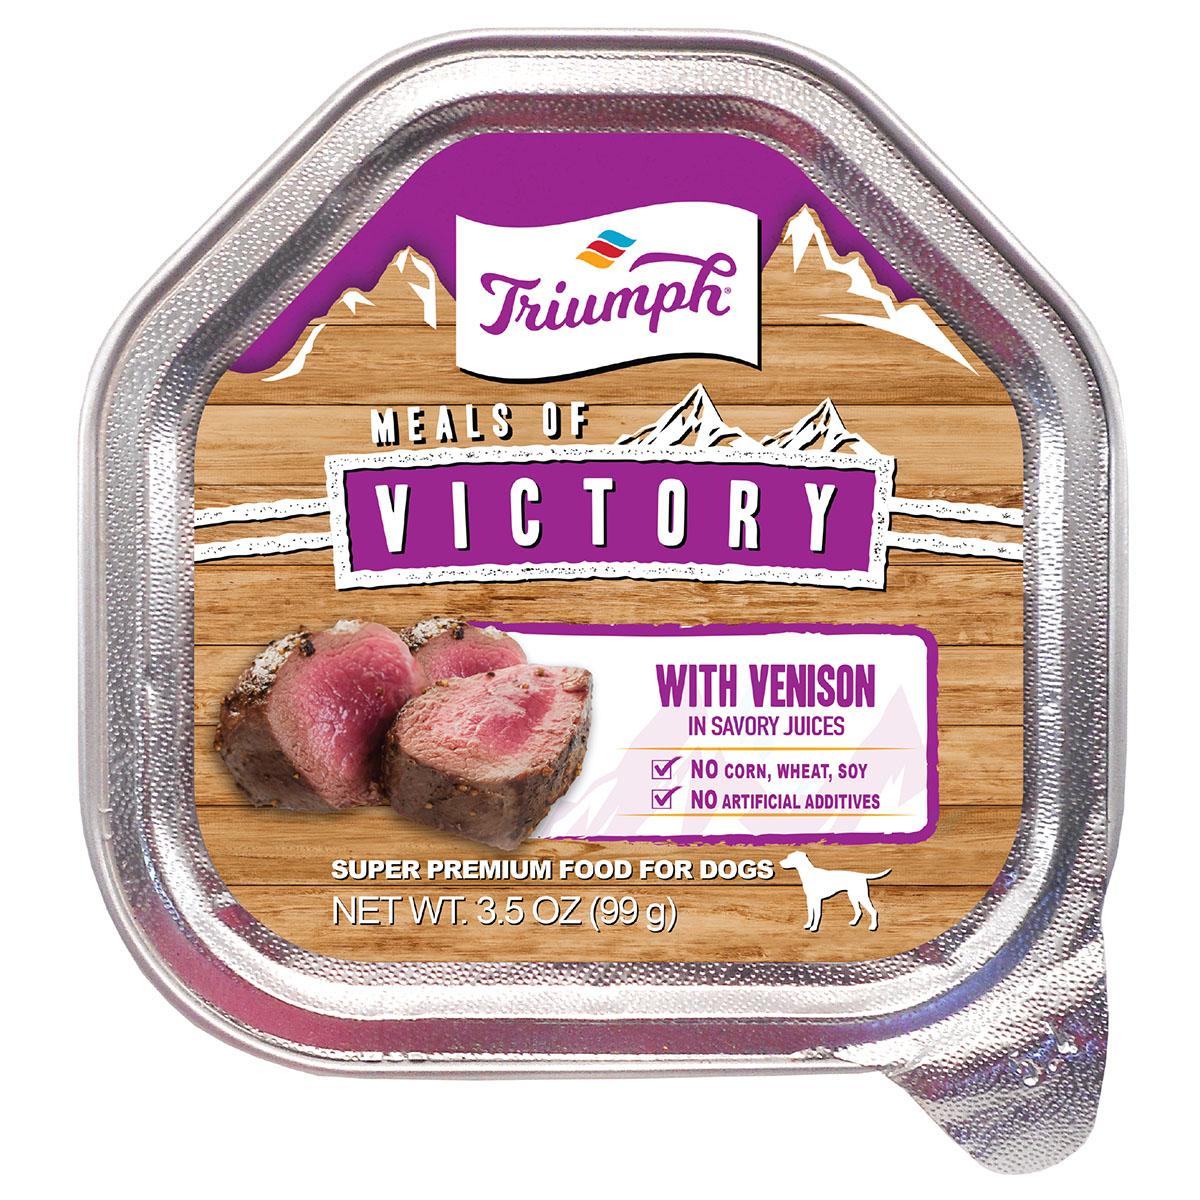 Triumph Meals of Victory with Venison in Savory Juices Dog Food Trays